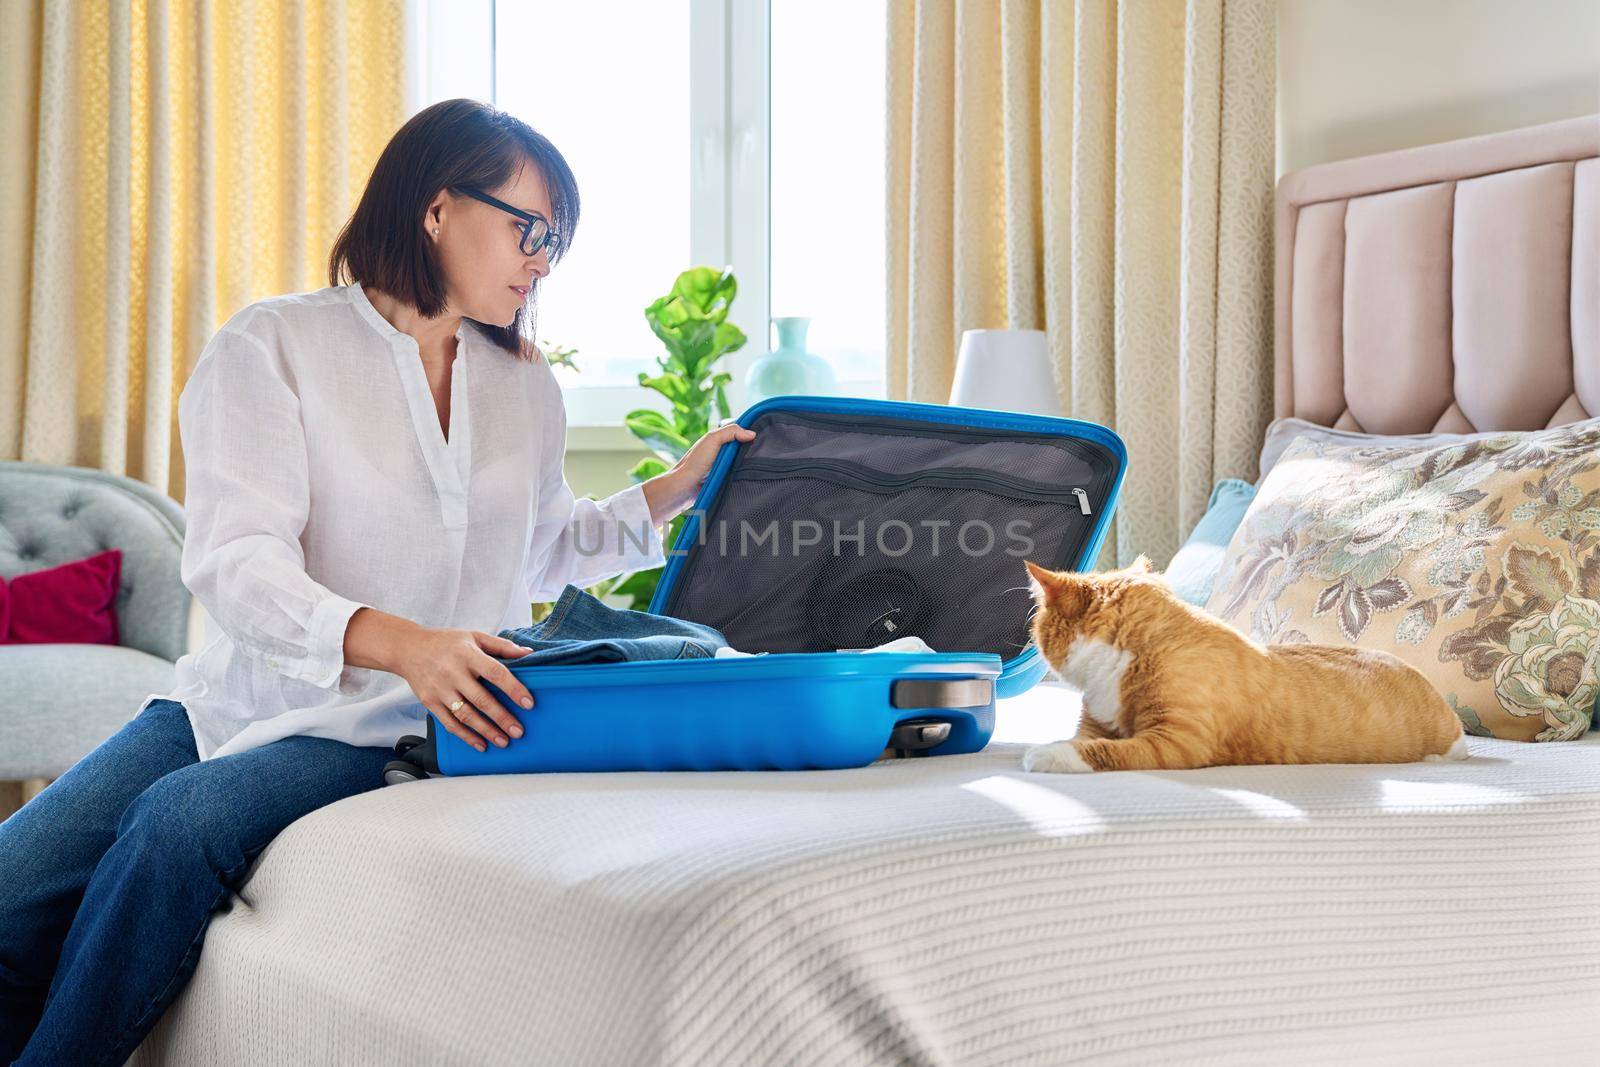 Happy woman packing luggage into suitcase with pet cat at home in bedroom. Mature female owner of old red pet going on trip, travel, vacation. Journey adventure holidays tourism concept